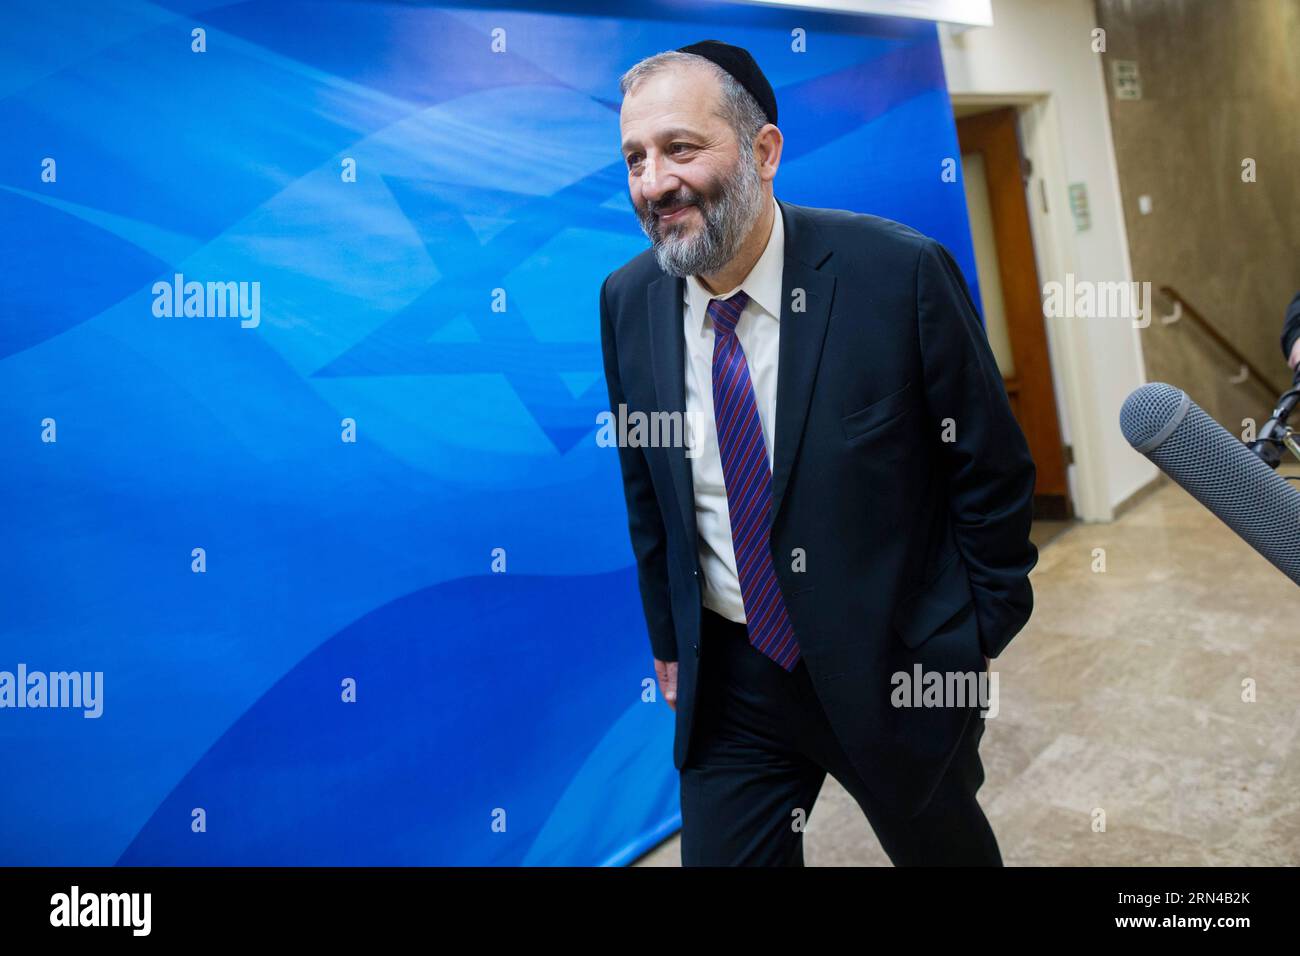 (150515) -- JERUSALEM, May 15, 2015 -- Incoming Israeli Economy Minister Aryeh Deri arrives for the first cabinet meeting of the Israel s 34th government at the Prime Minister s office in Jerusalem, on May 15, 2015. Israeli Prime Minister Benjamin Netanyahu s right-wing new coalition government was sworn in late Thursday night, after the parliament approved it by a razor-thin 61-59 majority. /Yonatan Sindel) MIDEAST-JERUSALEM-ISRAEL-34TH GOV T-FIRST CABINET MEETING JINI PUBLICATIONxNOTxINxCHN   Jerusalem May 15 2015 Incoming Israeli Economy Ministers Aryeh Deri arrives for The First Cabinet Me Stock Photo